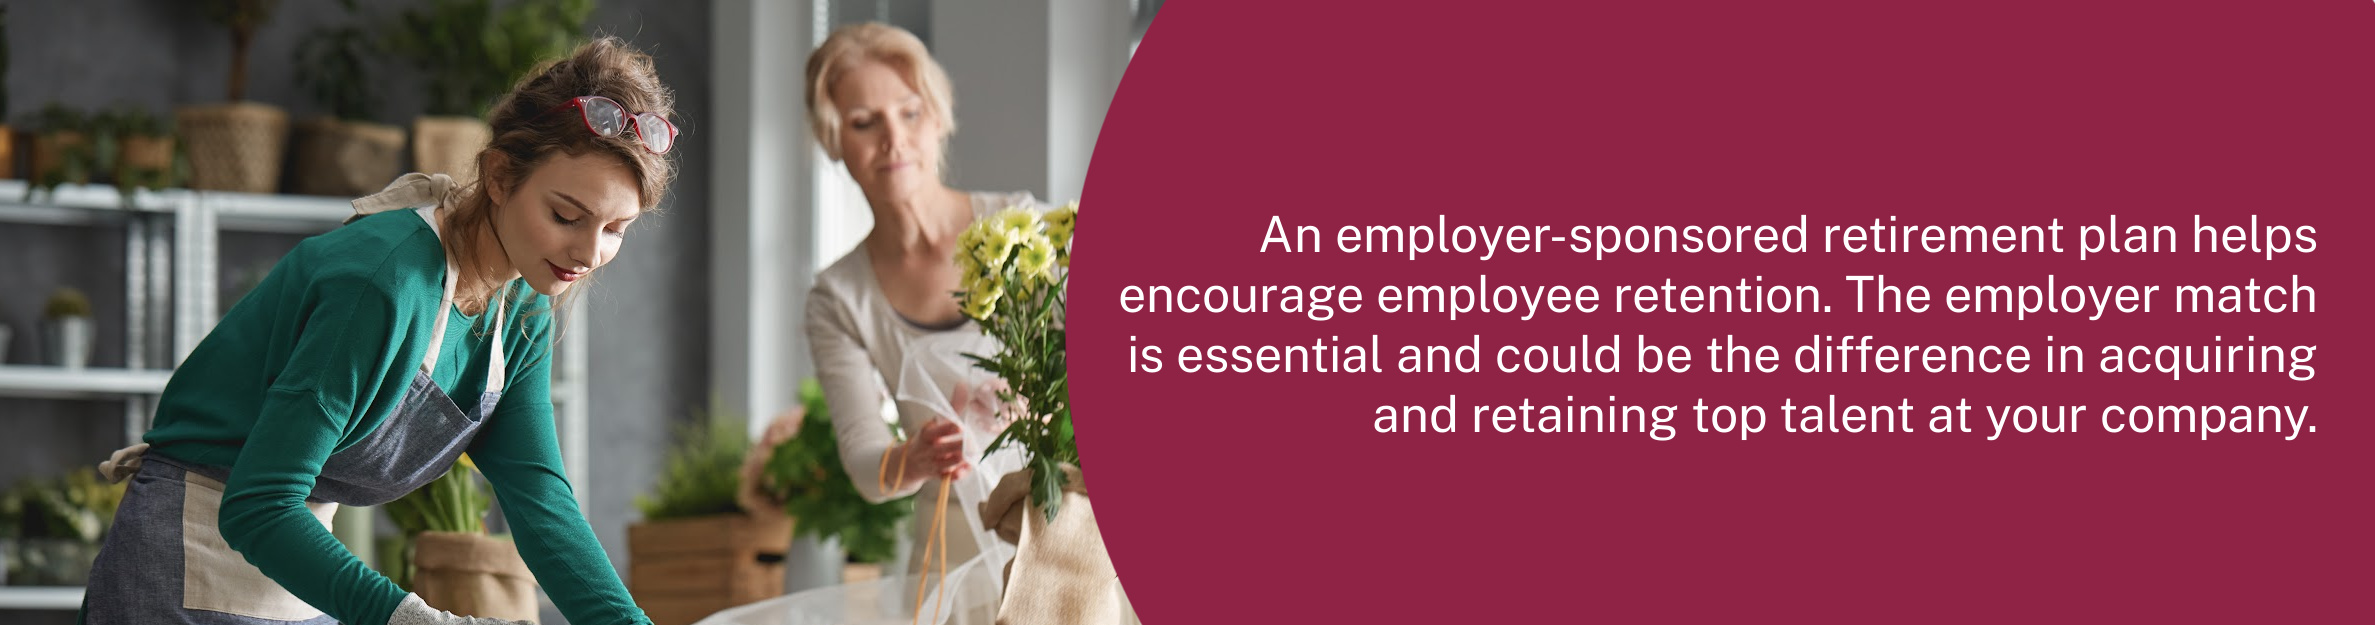 Photo: Two ladies working in a flower shop
Text: An employer-sponsored retirement plan helps encourage employee retention. The employer match is essential and could be the difference in acquiring and retaining top talent at your company.